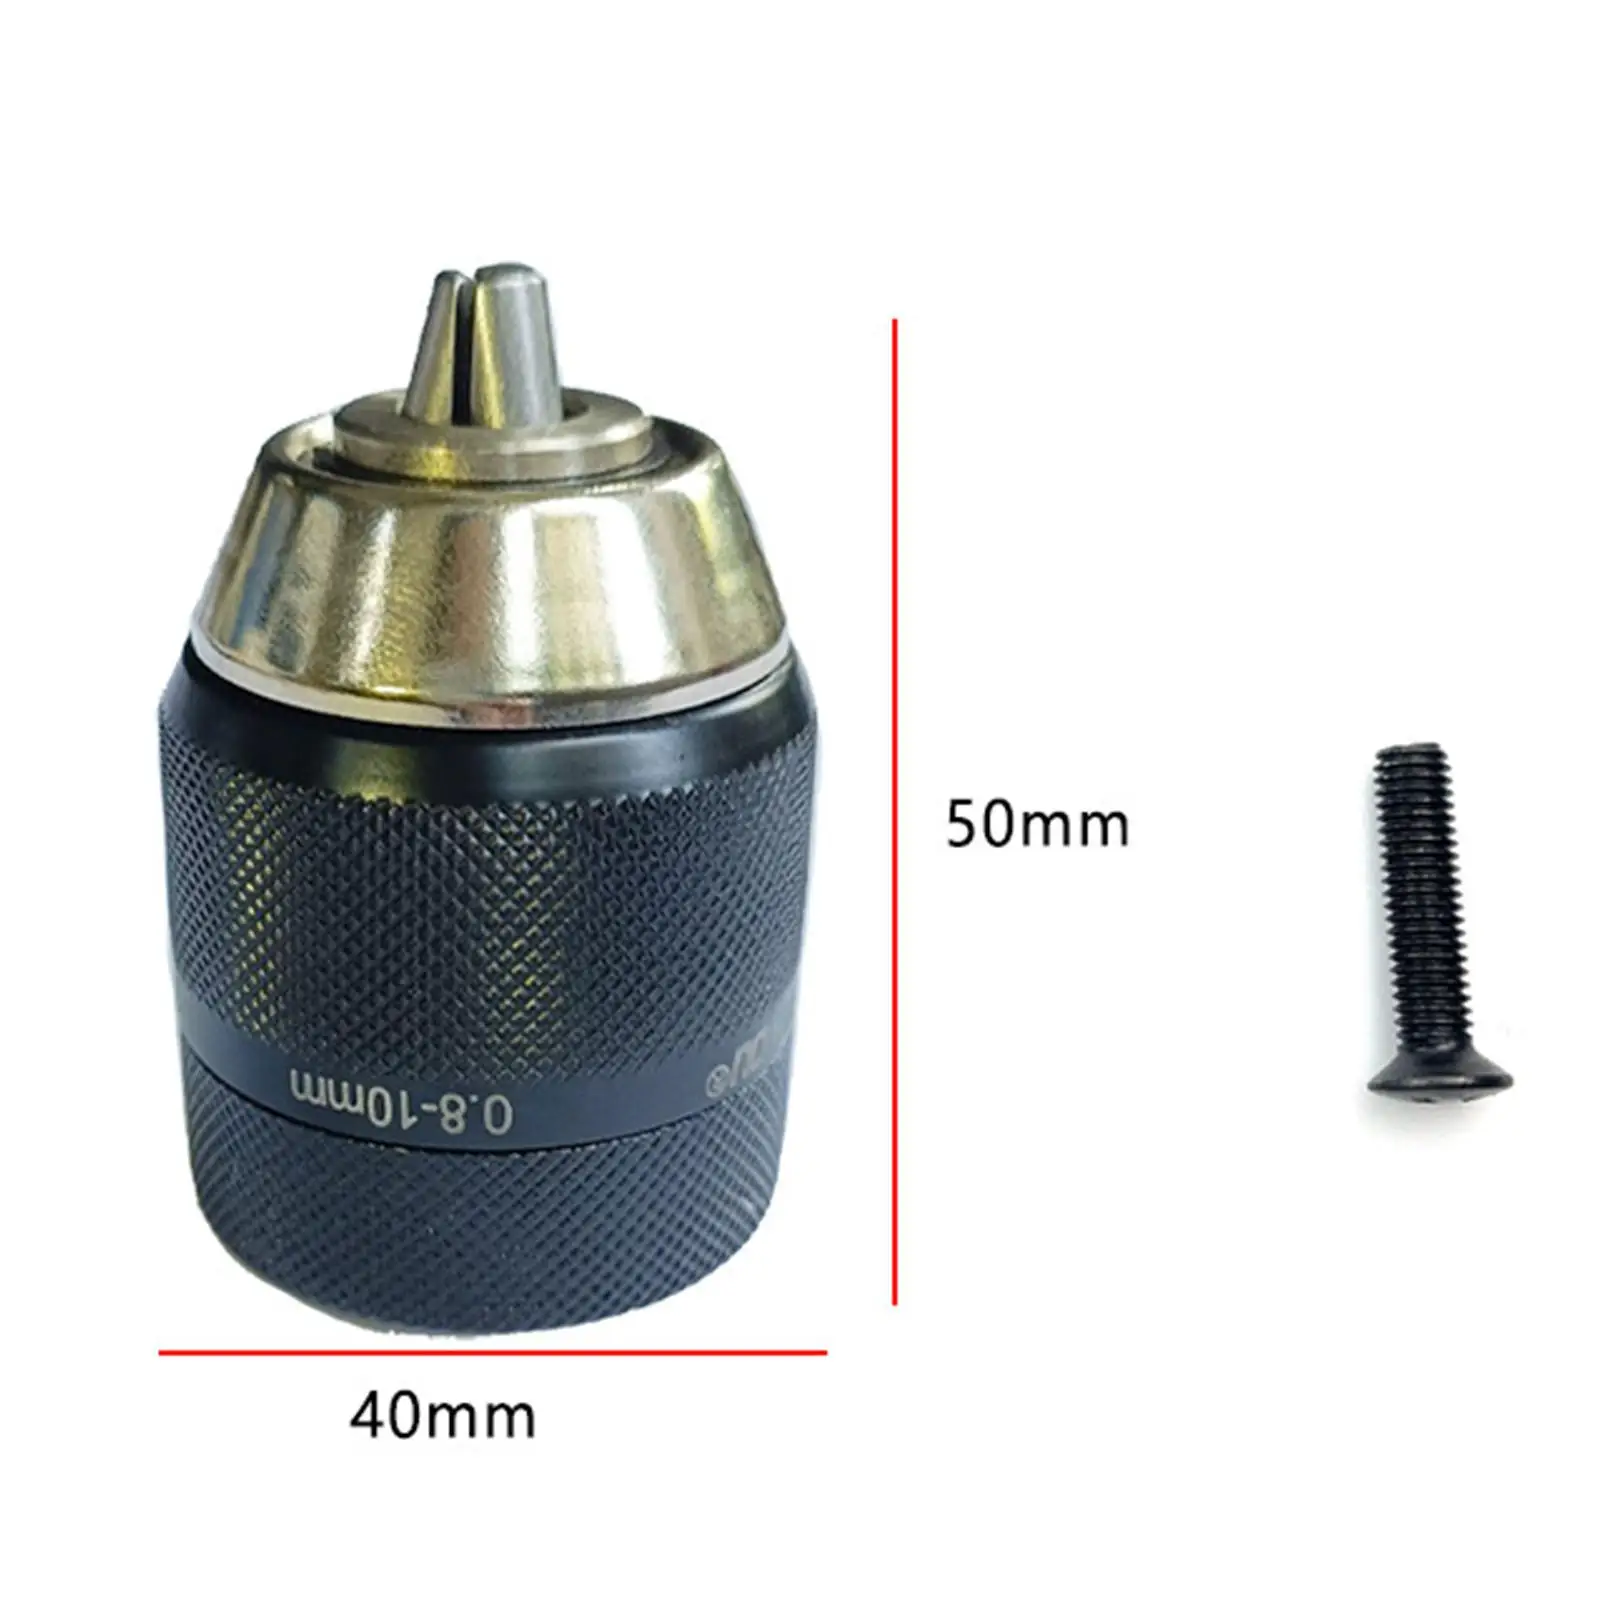 Durable Keyless Drill Chuck Converter 3/8-24 0.8-10mm Steel Material Conversion Tool   Accessories for Home Improvement